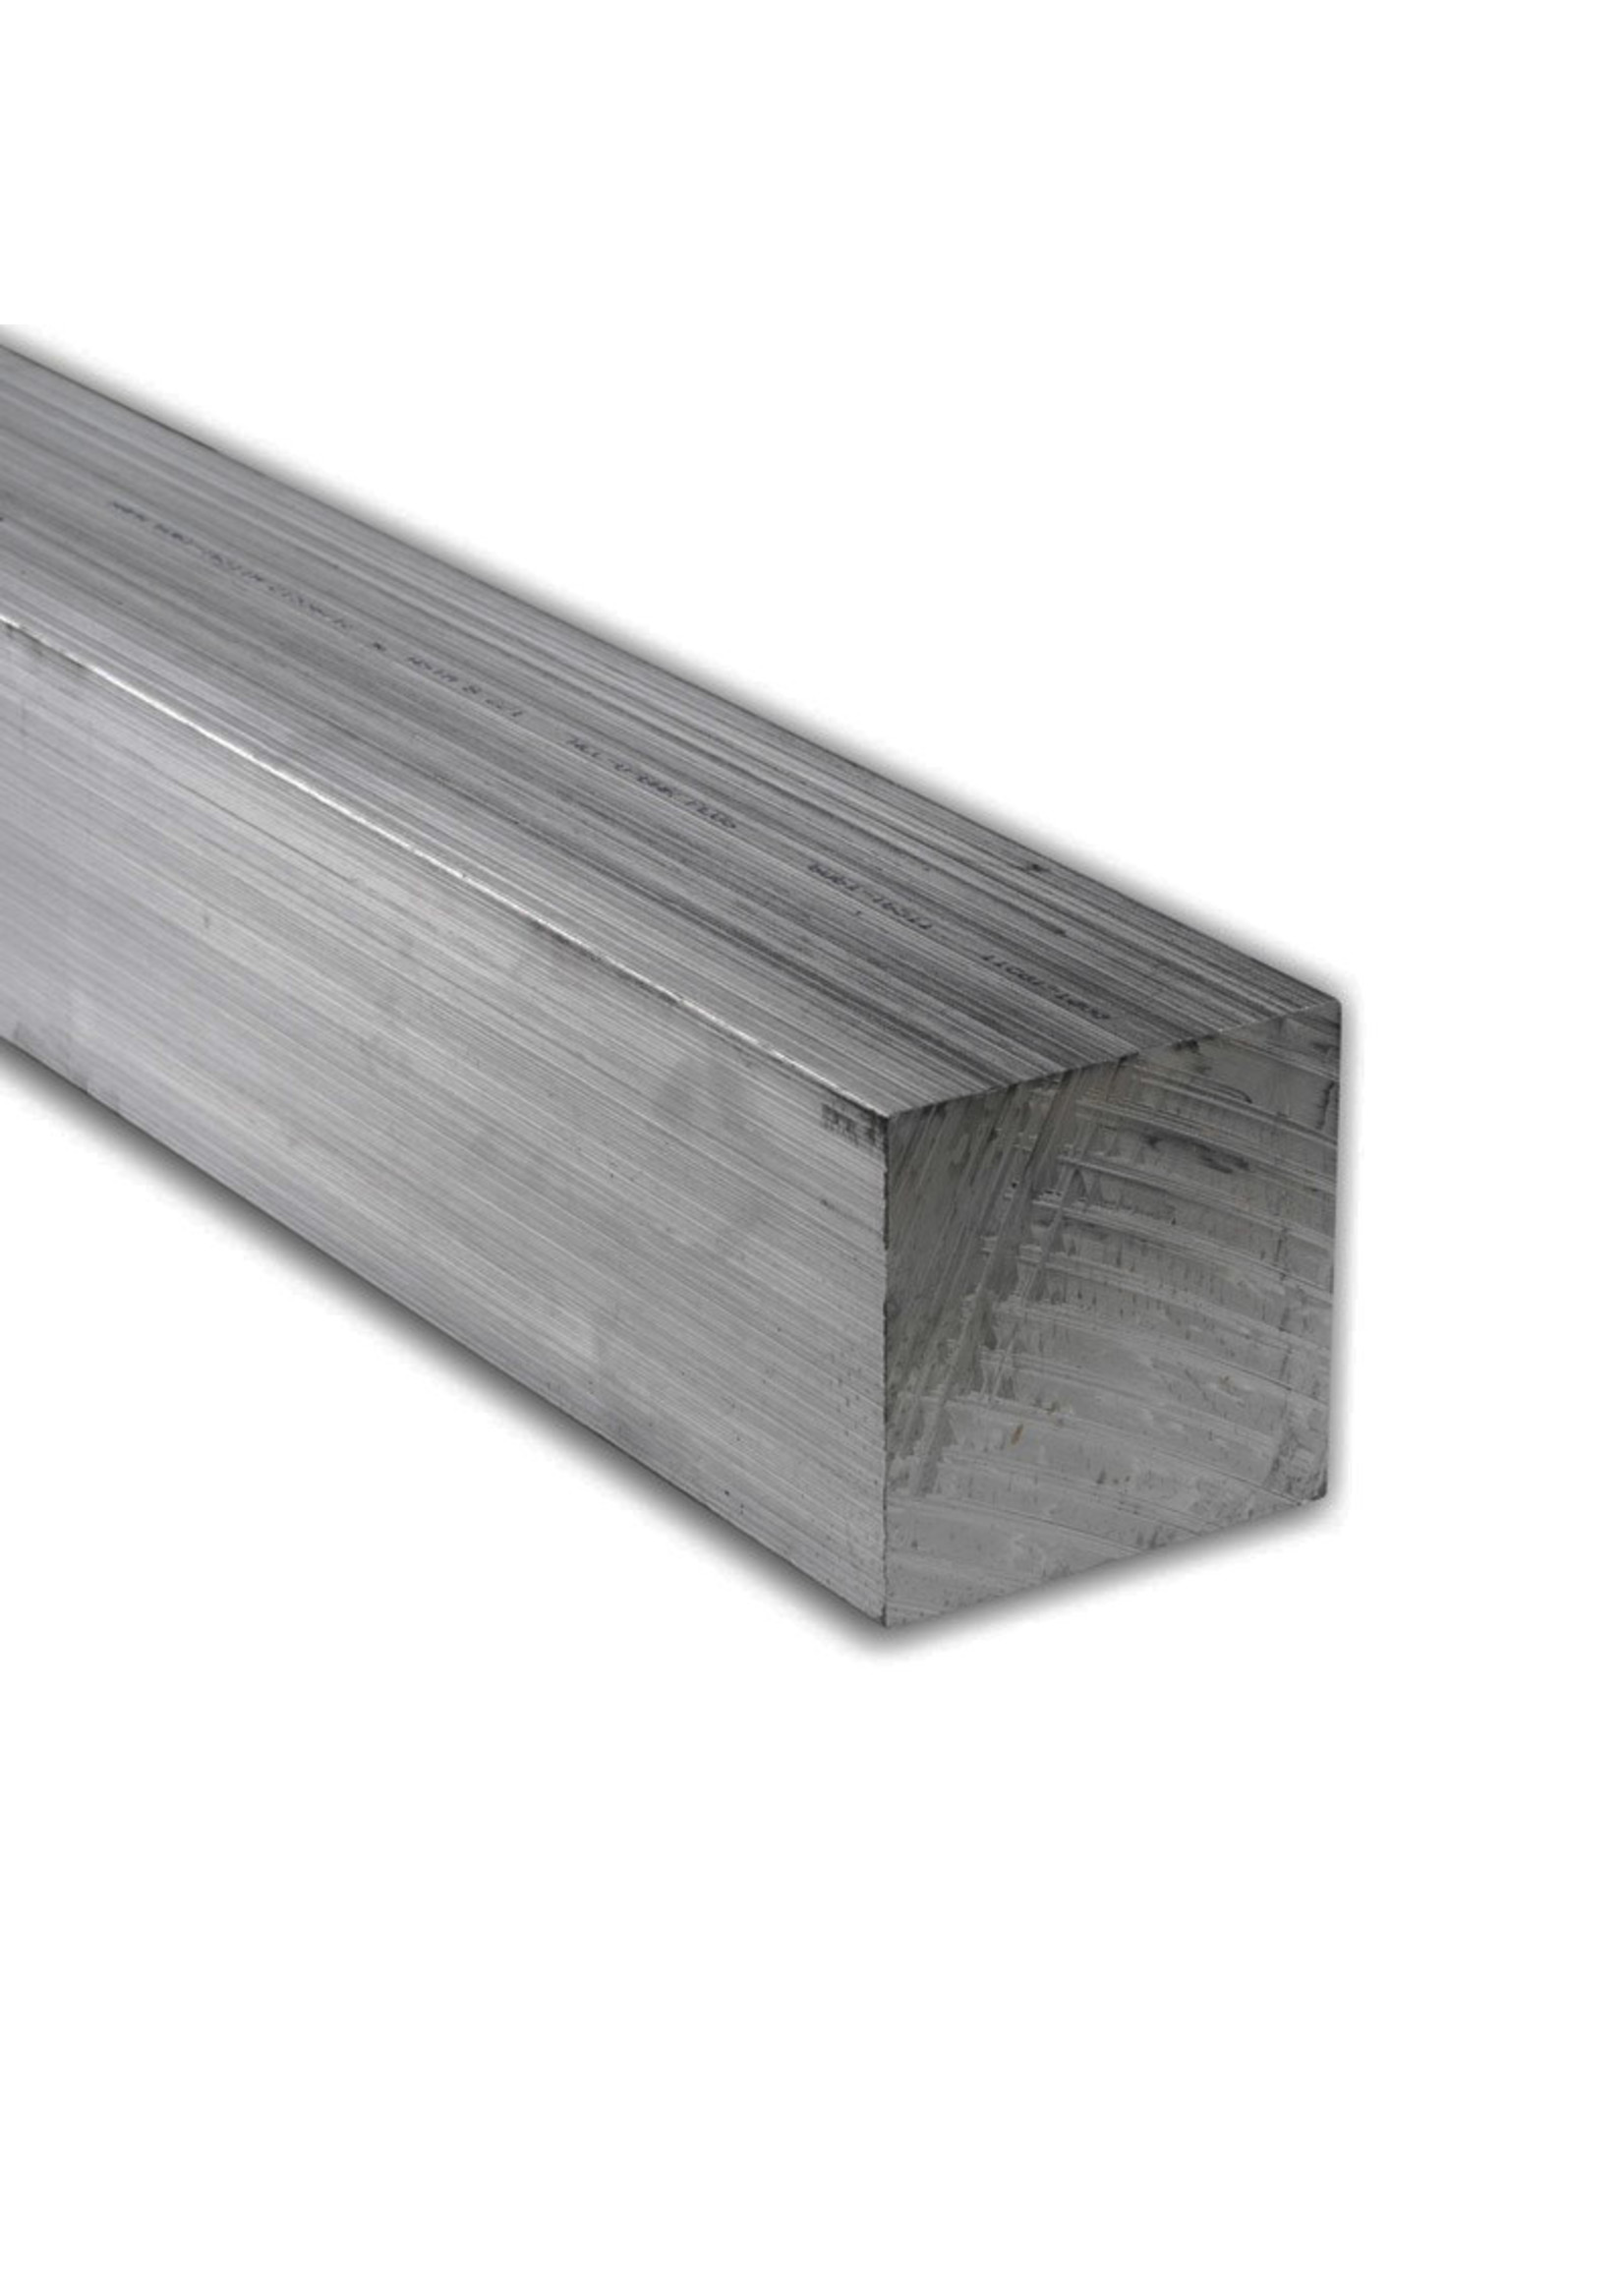 Square Bar Stock 1/2'' X 1/2''  by 80" Hot rolled Steel (A36)